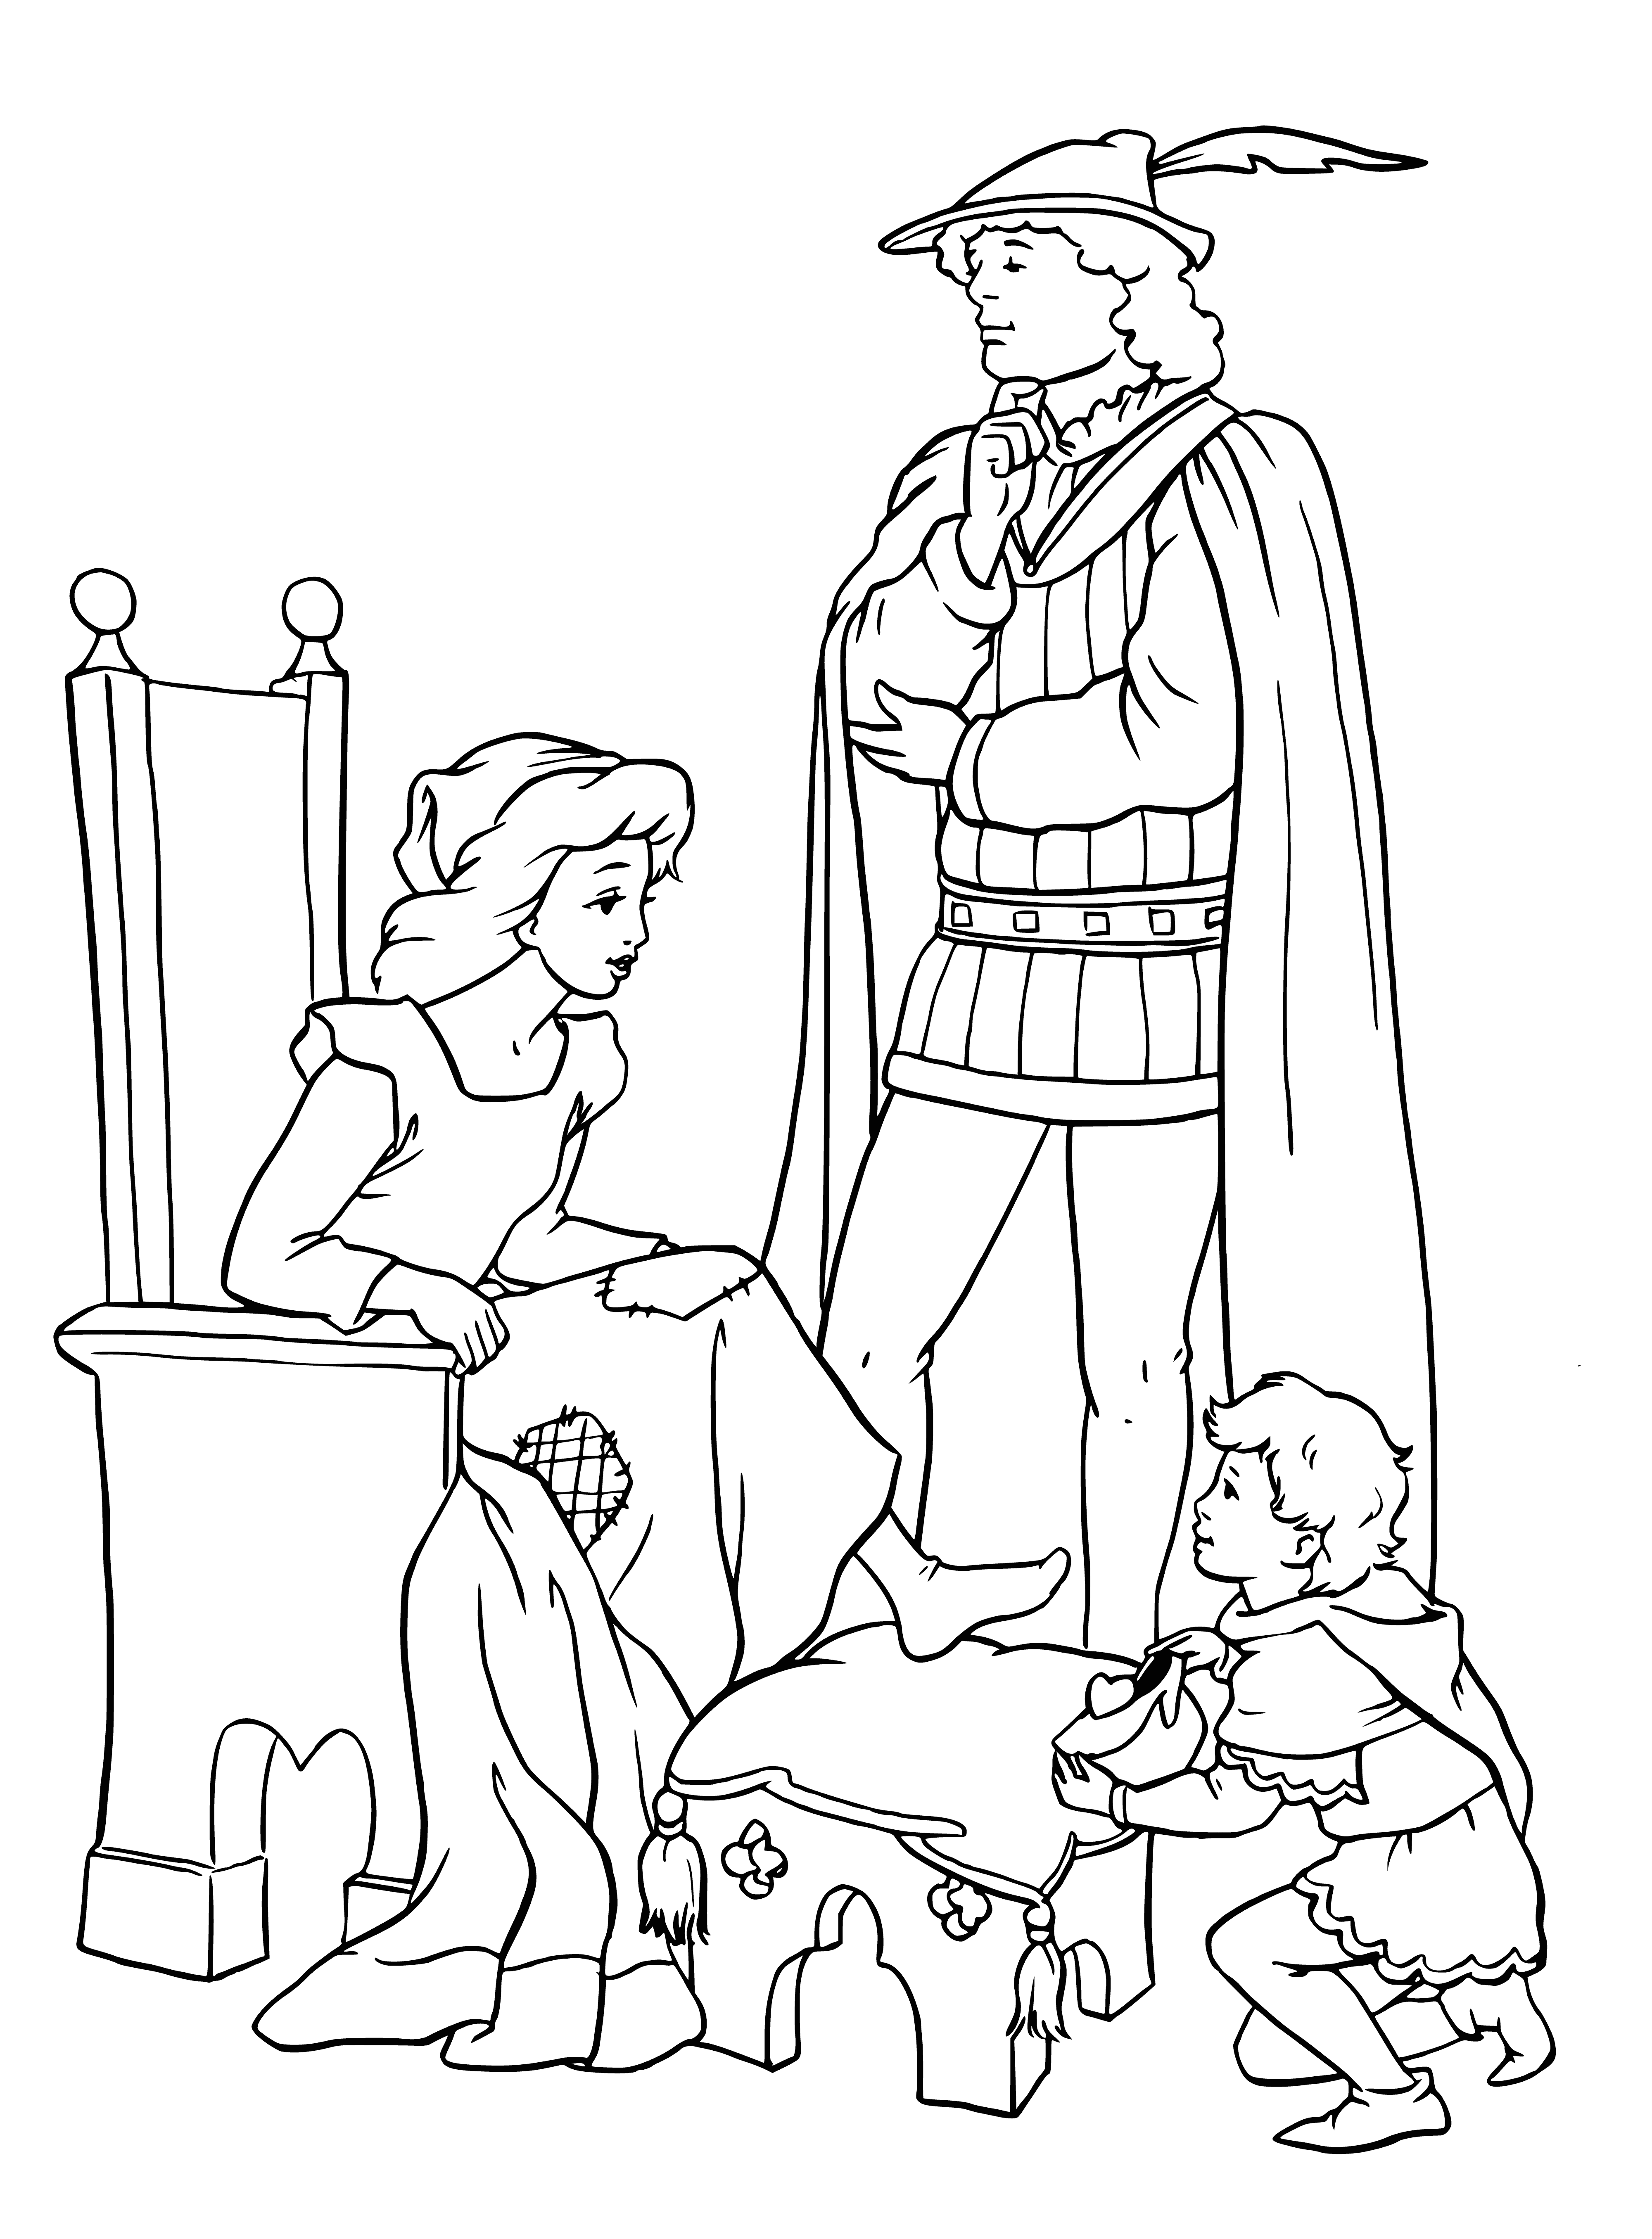 coloring page: Beautiful woman adorned w/ white dress, blue sash & bow, trying on glass slipper while holding a stethoscope, anxious expression on her face.